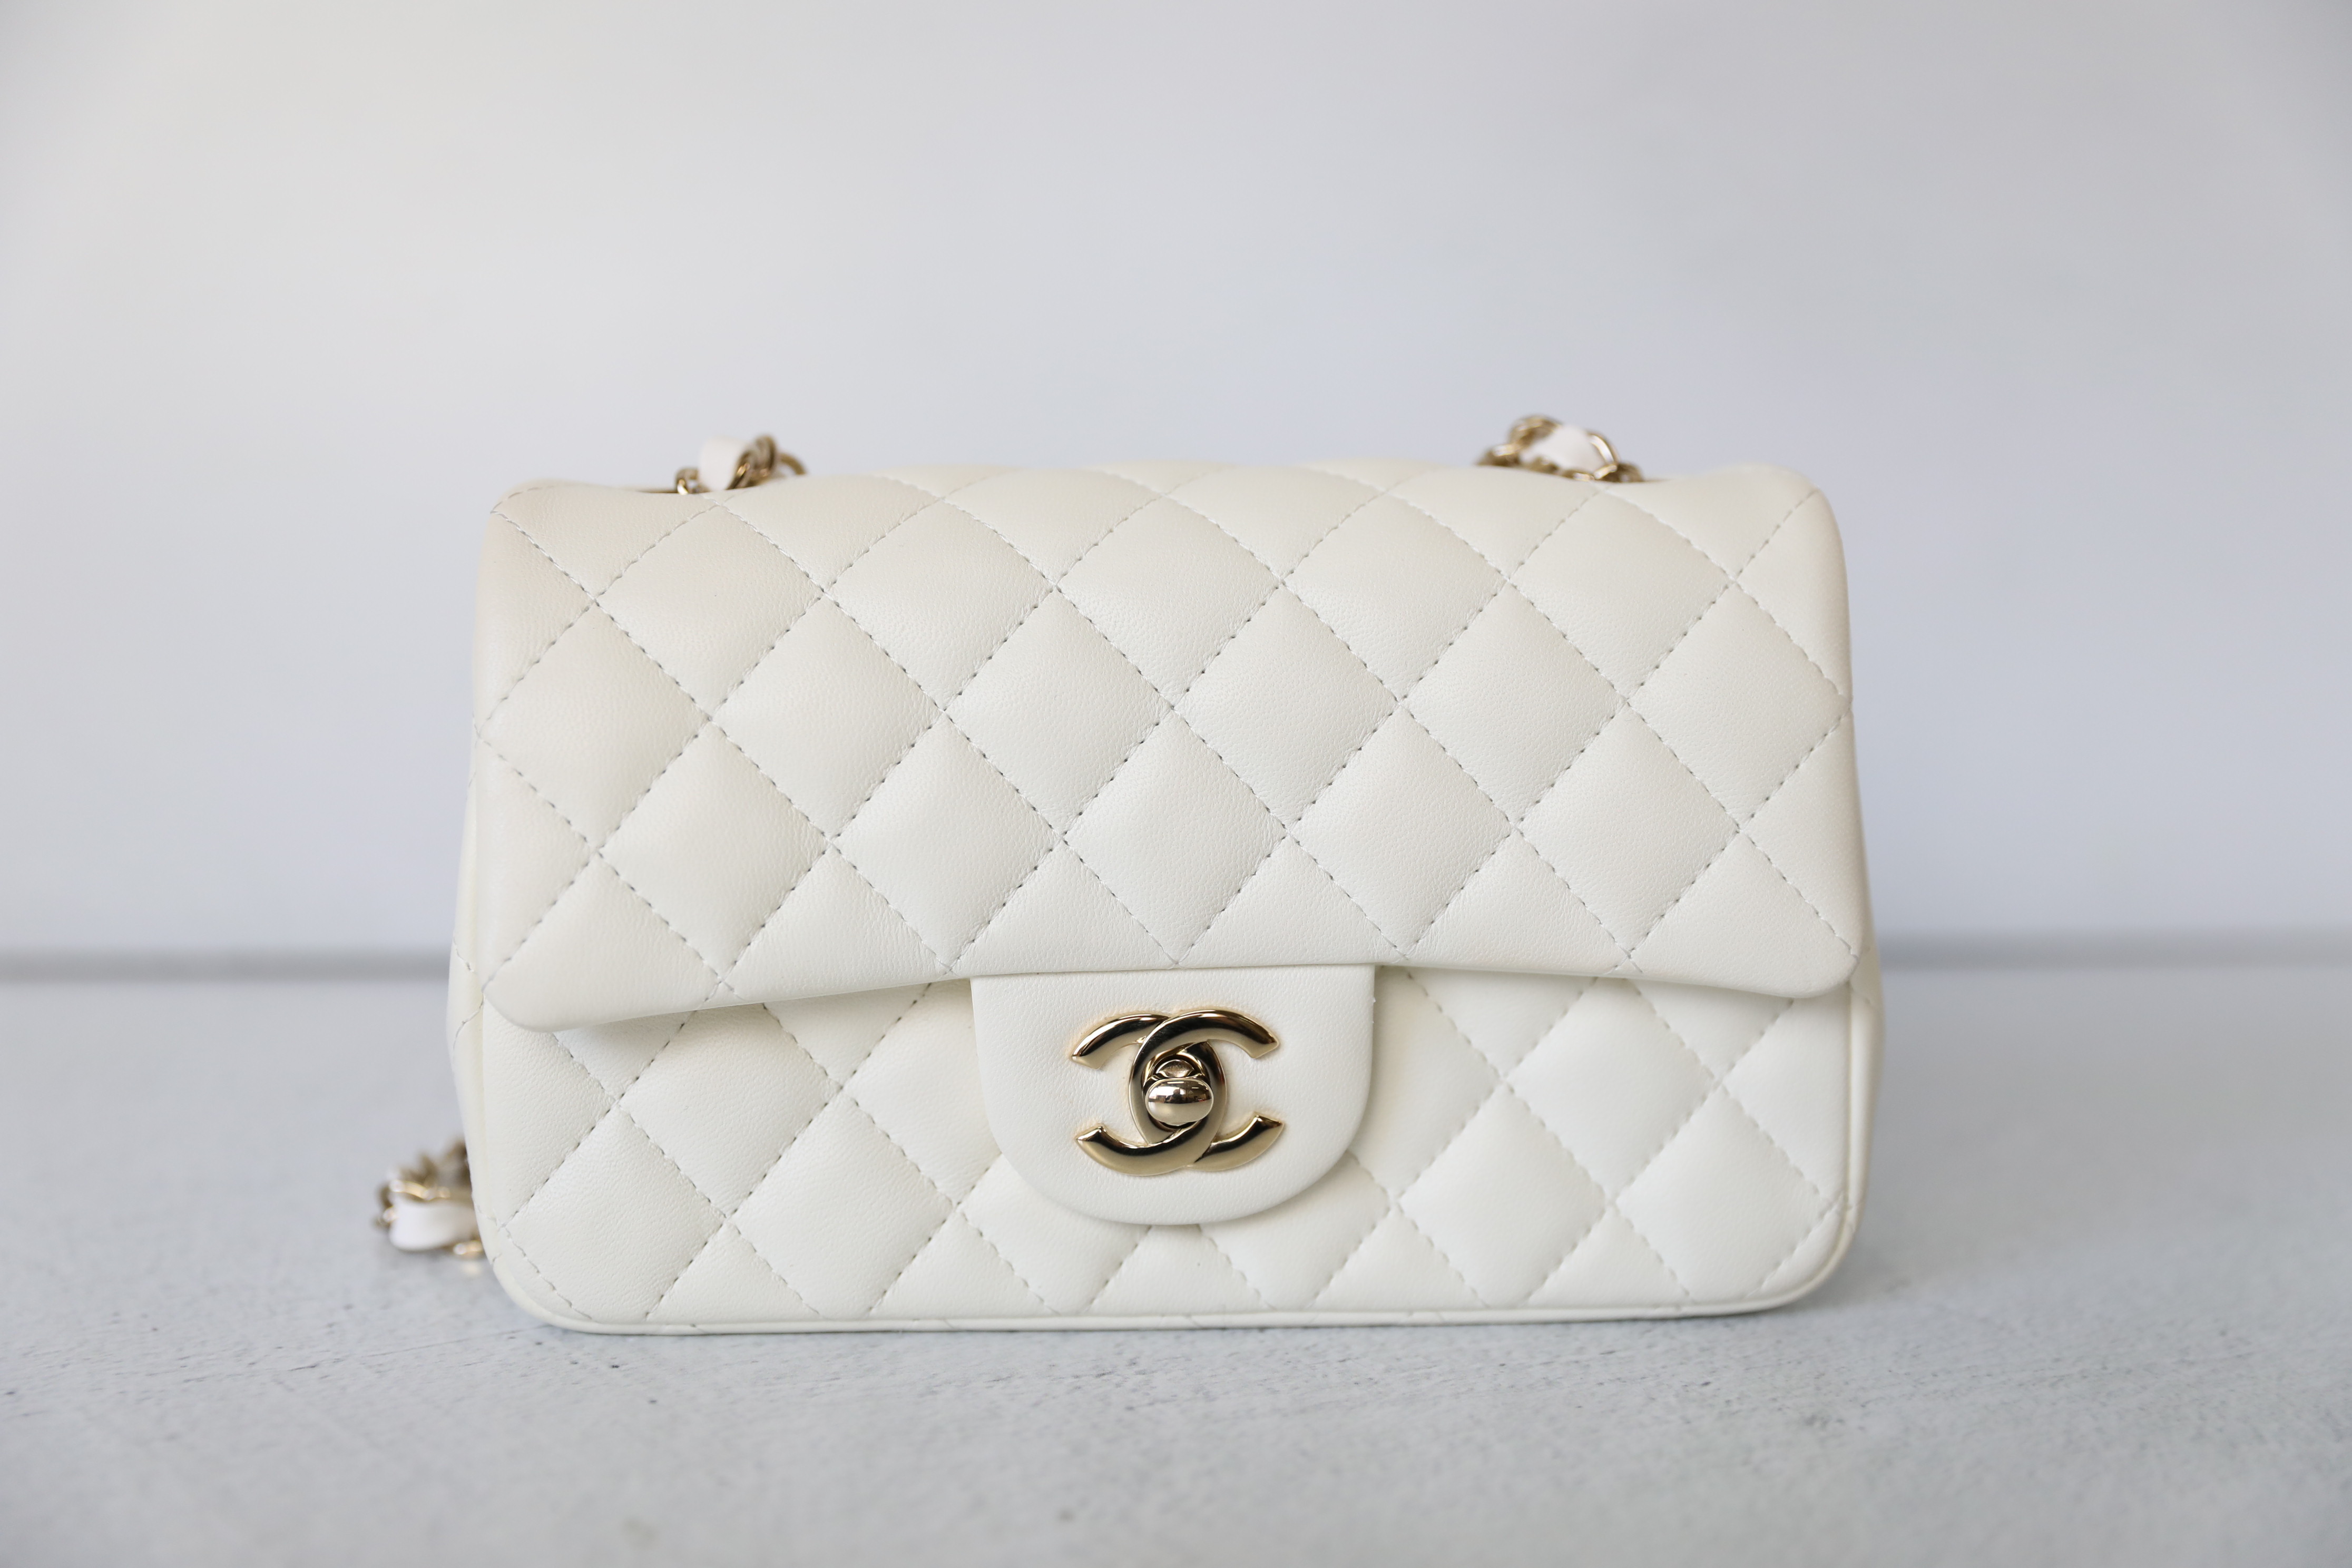 Chanel Classic Mini Rectangular, White Lambskin Leather with Gold